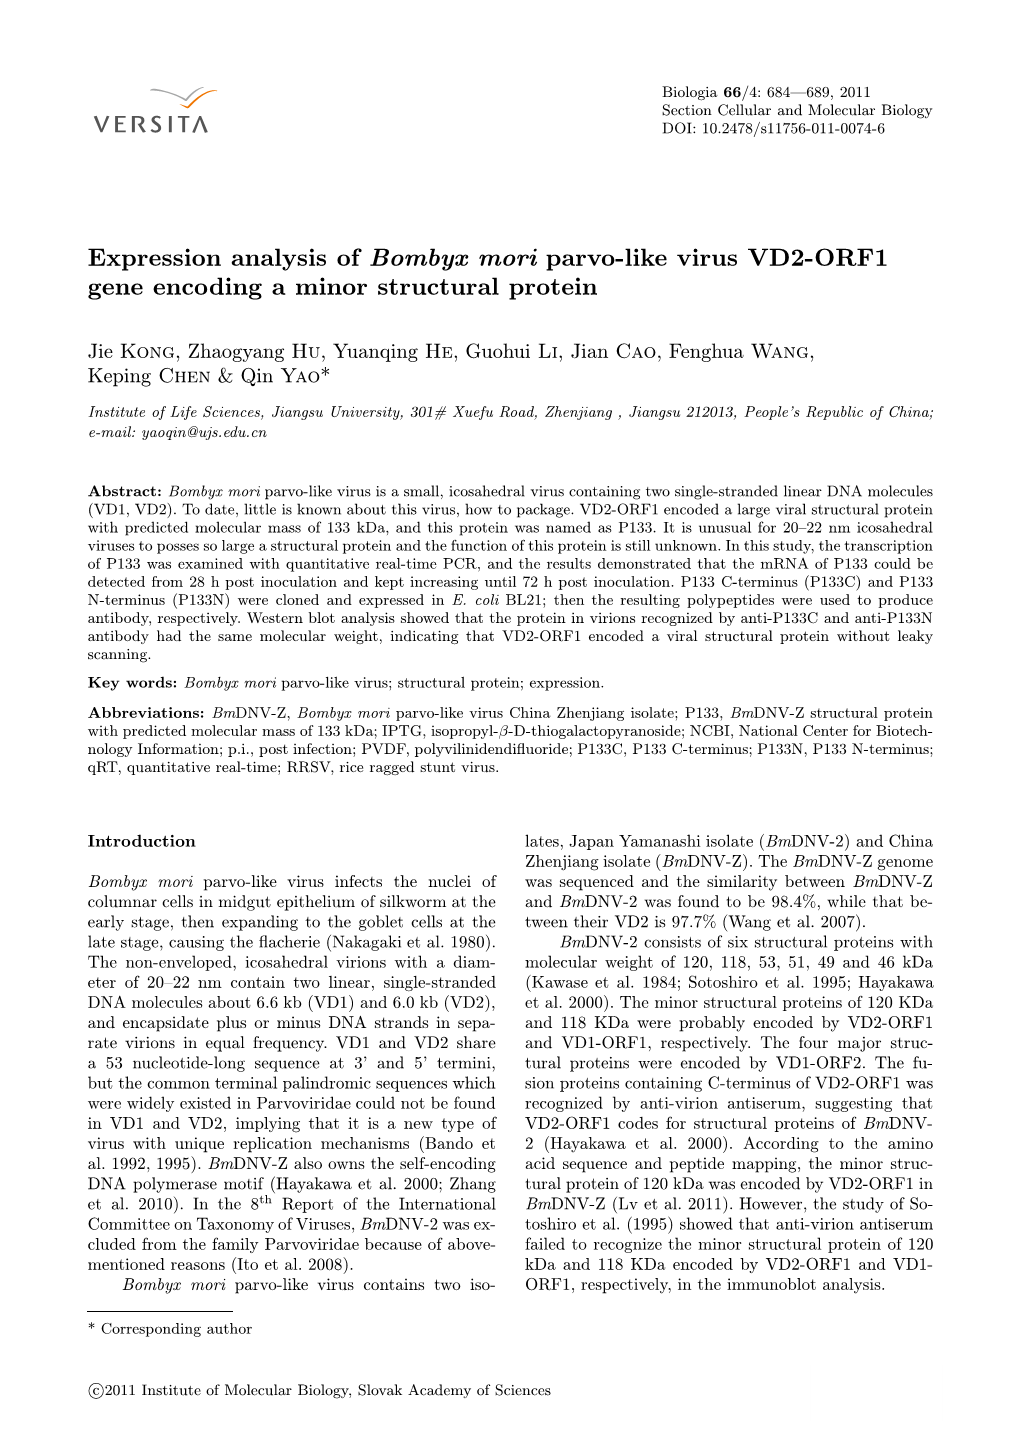 Expression Analysis of Bombyx Mori Parvo-Like Virus VD2-ORF1 Gene Encoding a Minor Structural Protein